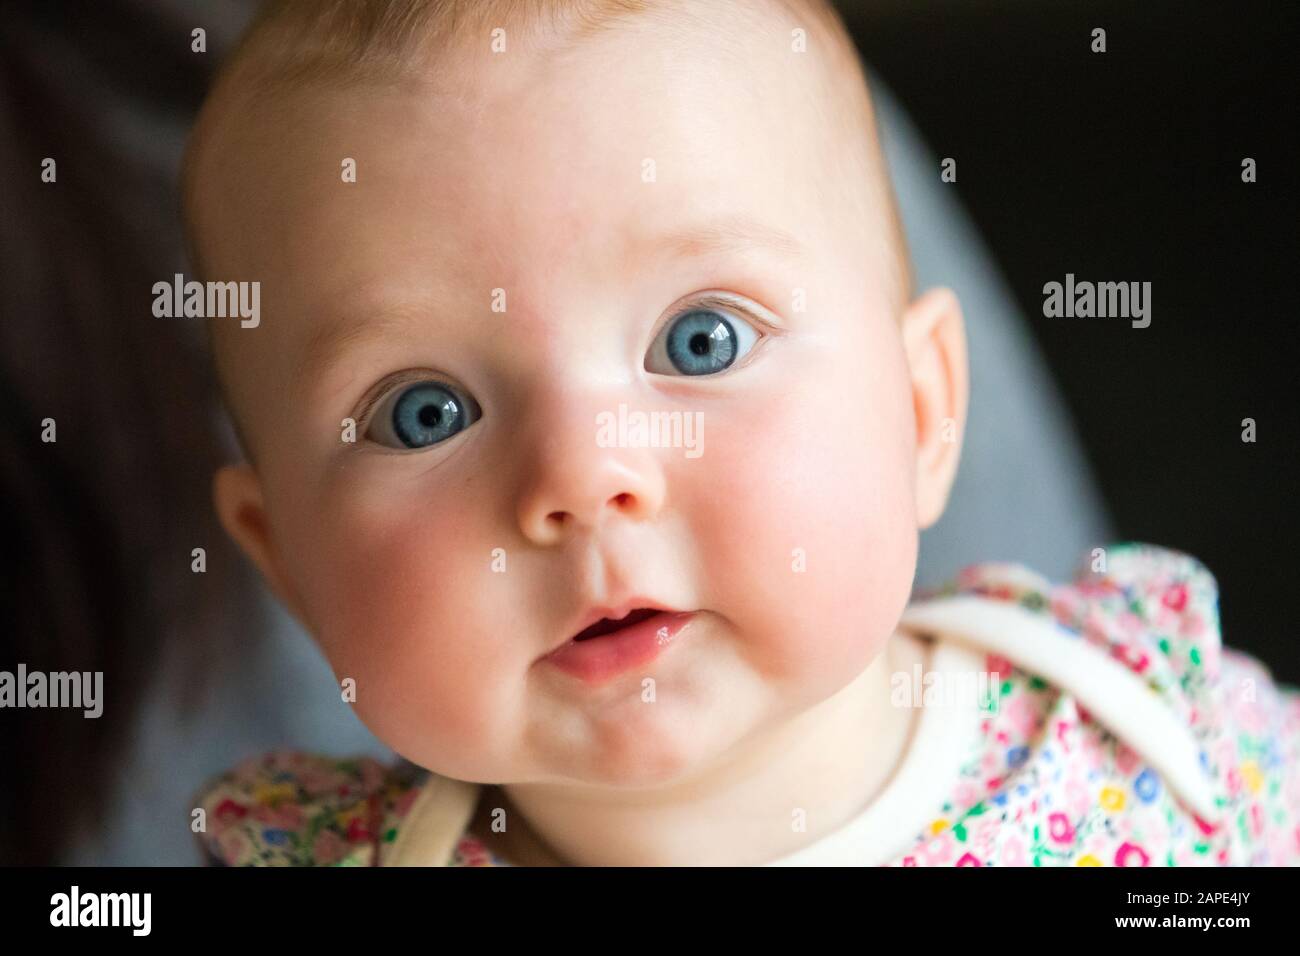 Isolated close up head shot of a 4 1/2 month old female infant. Stock Photo